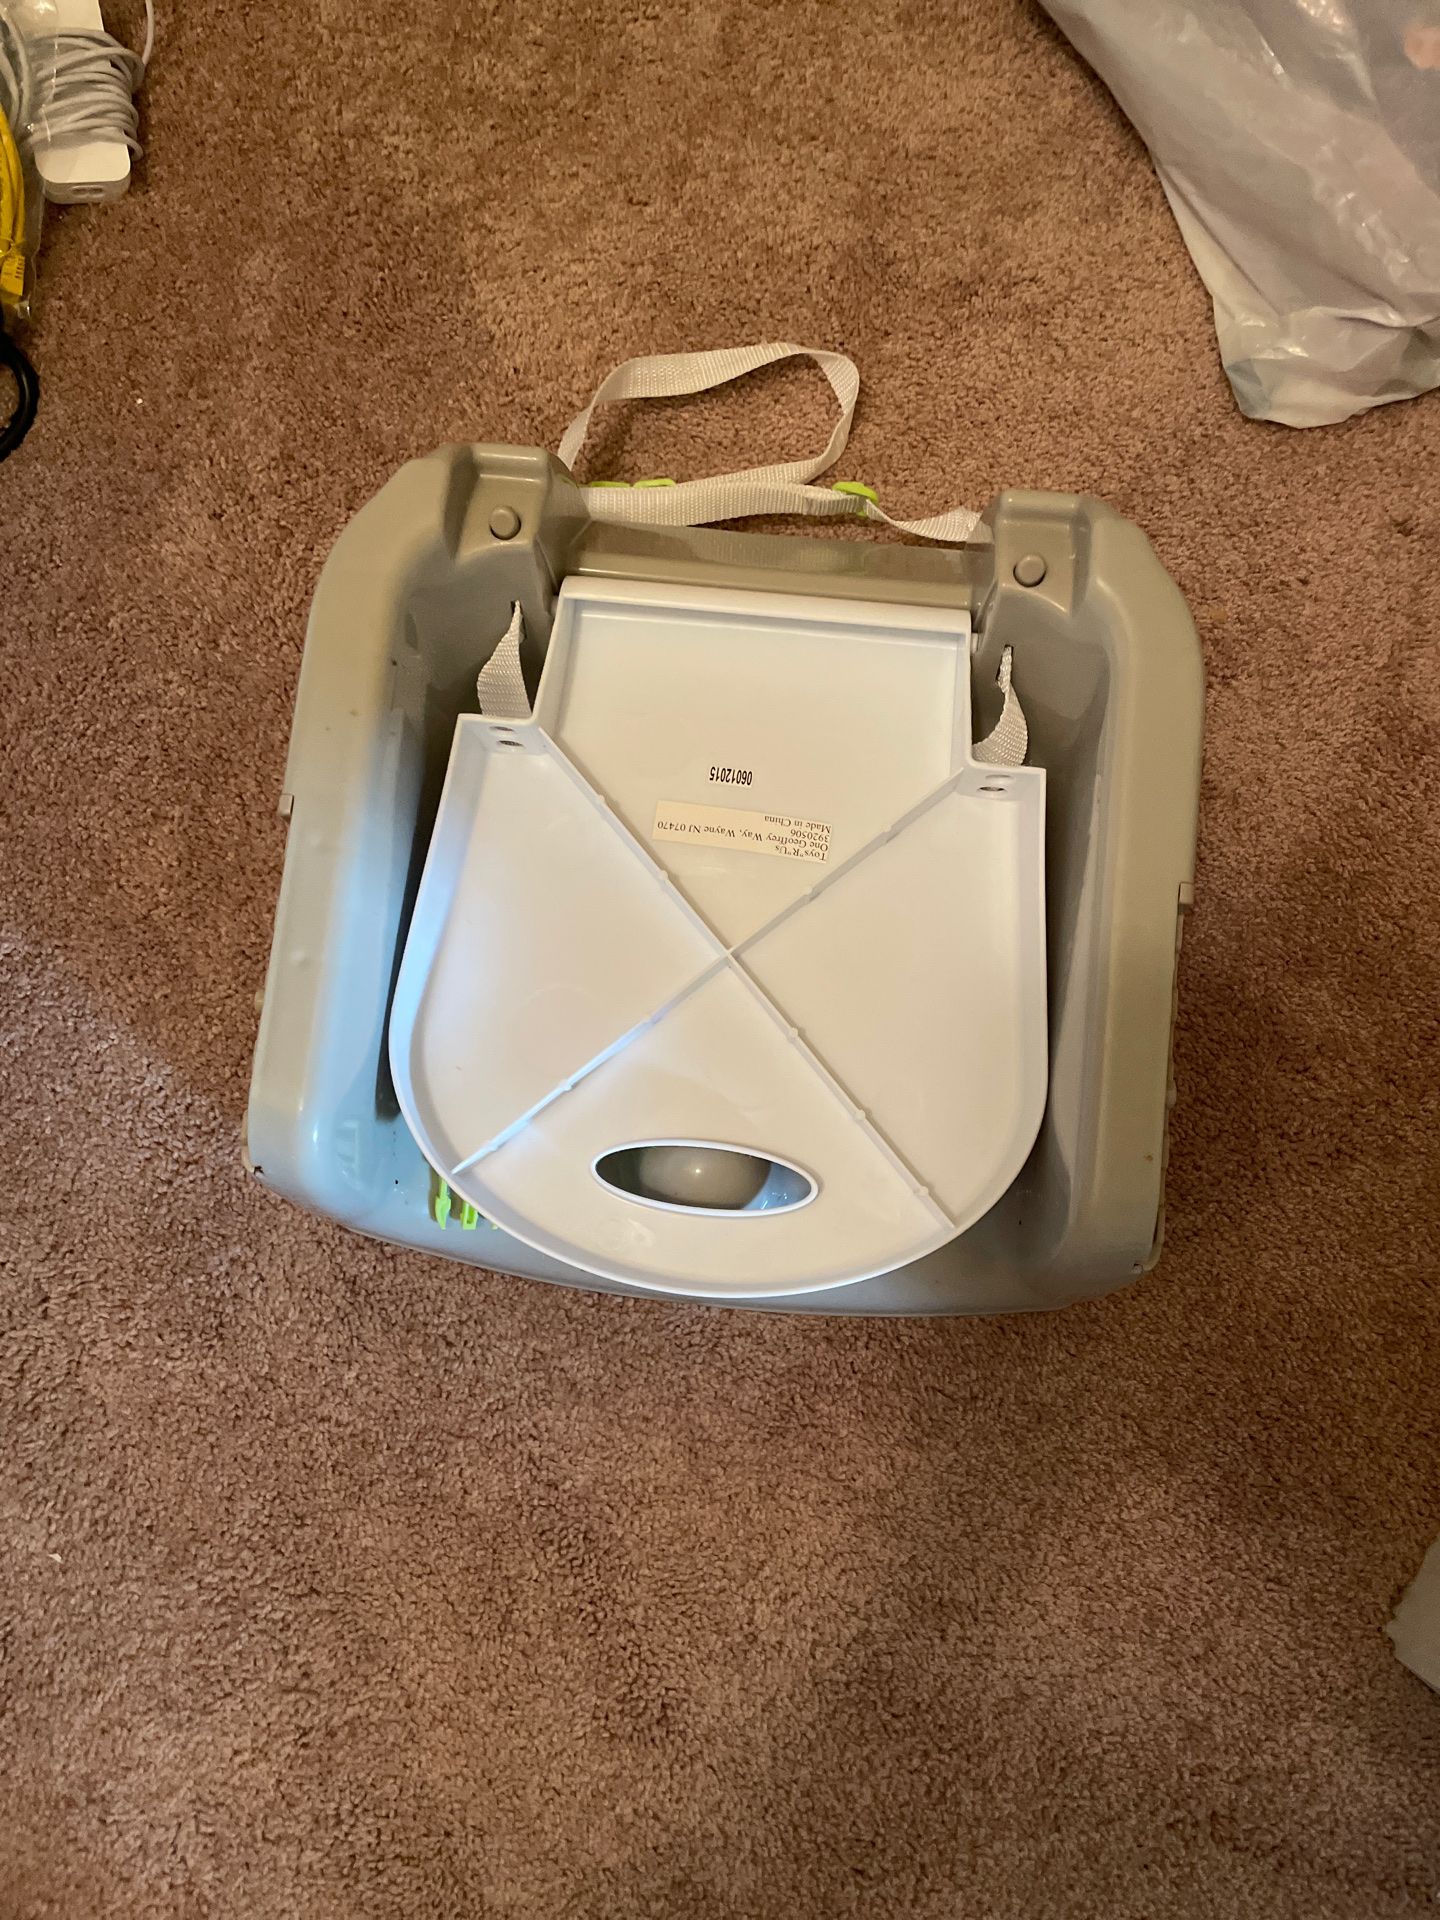 Used child booster seat for eating-toys r us brand